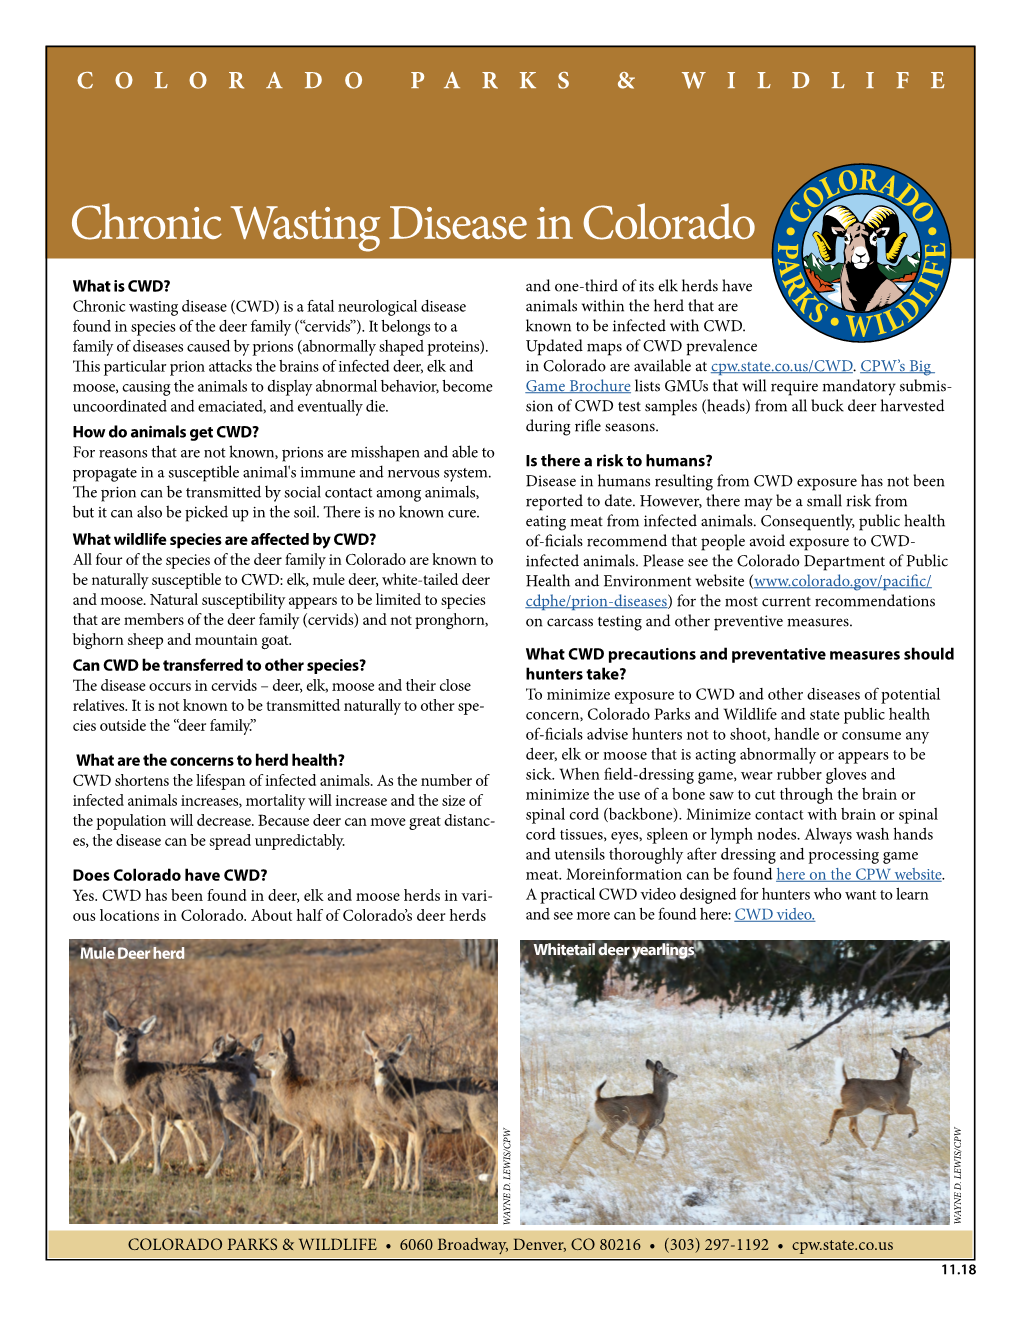 Chronic Wasting Disease in Colorado